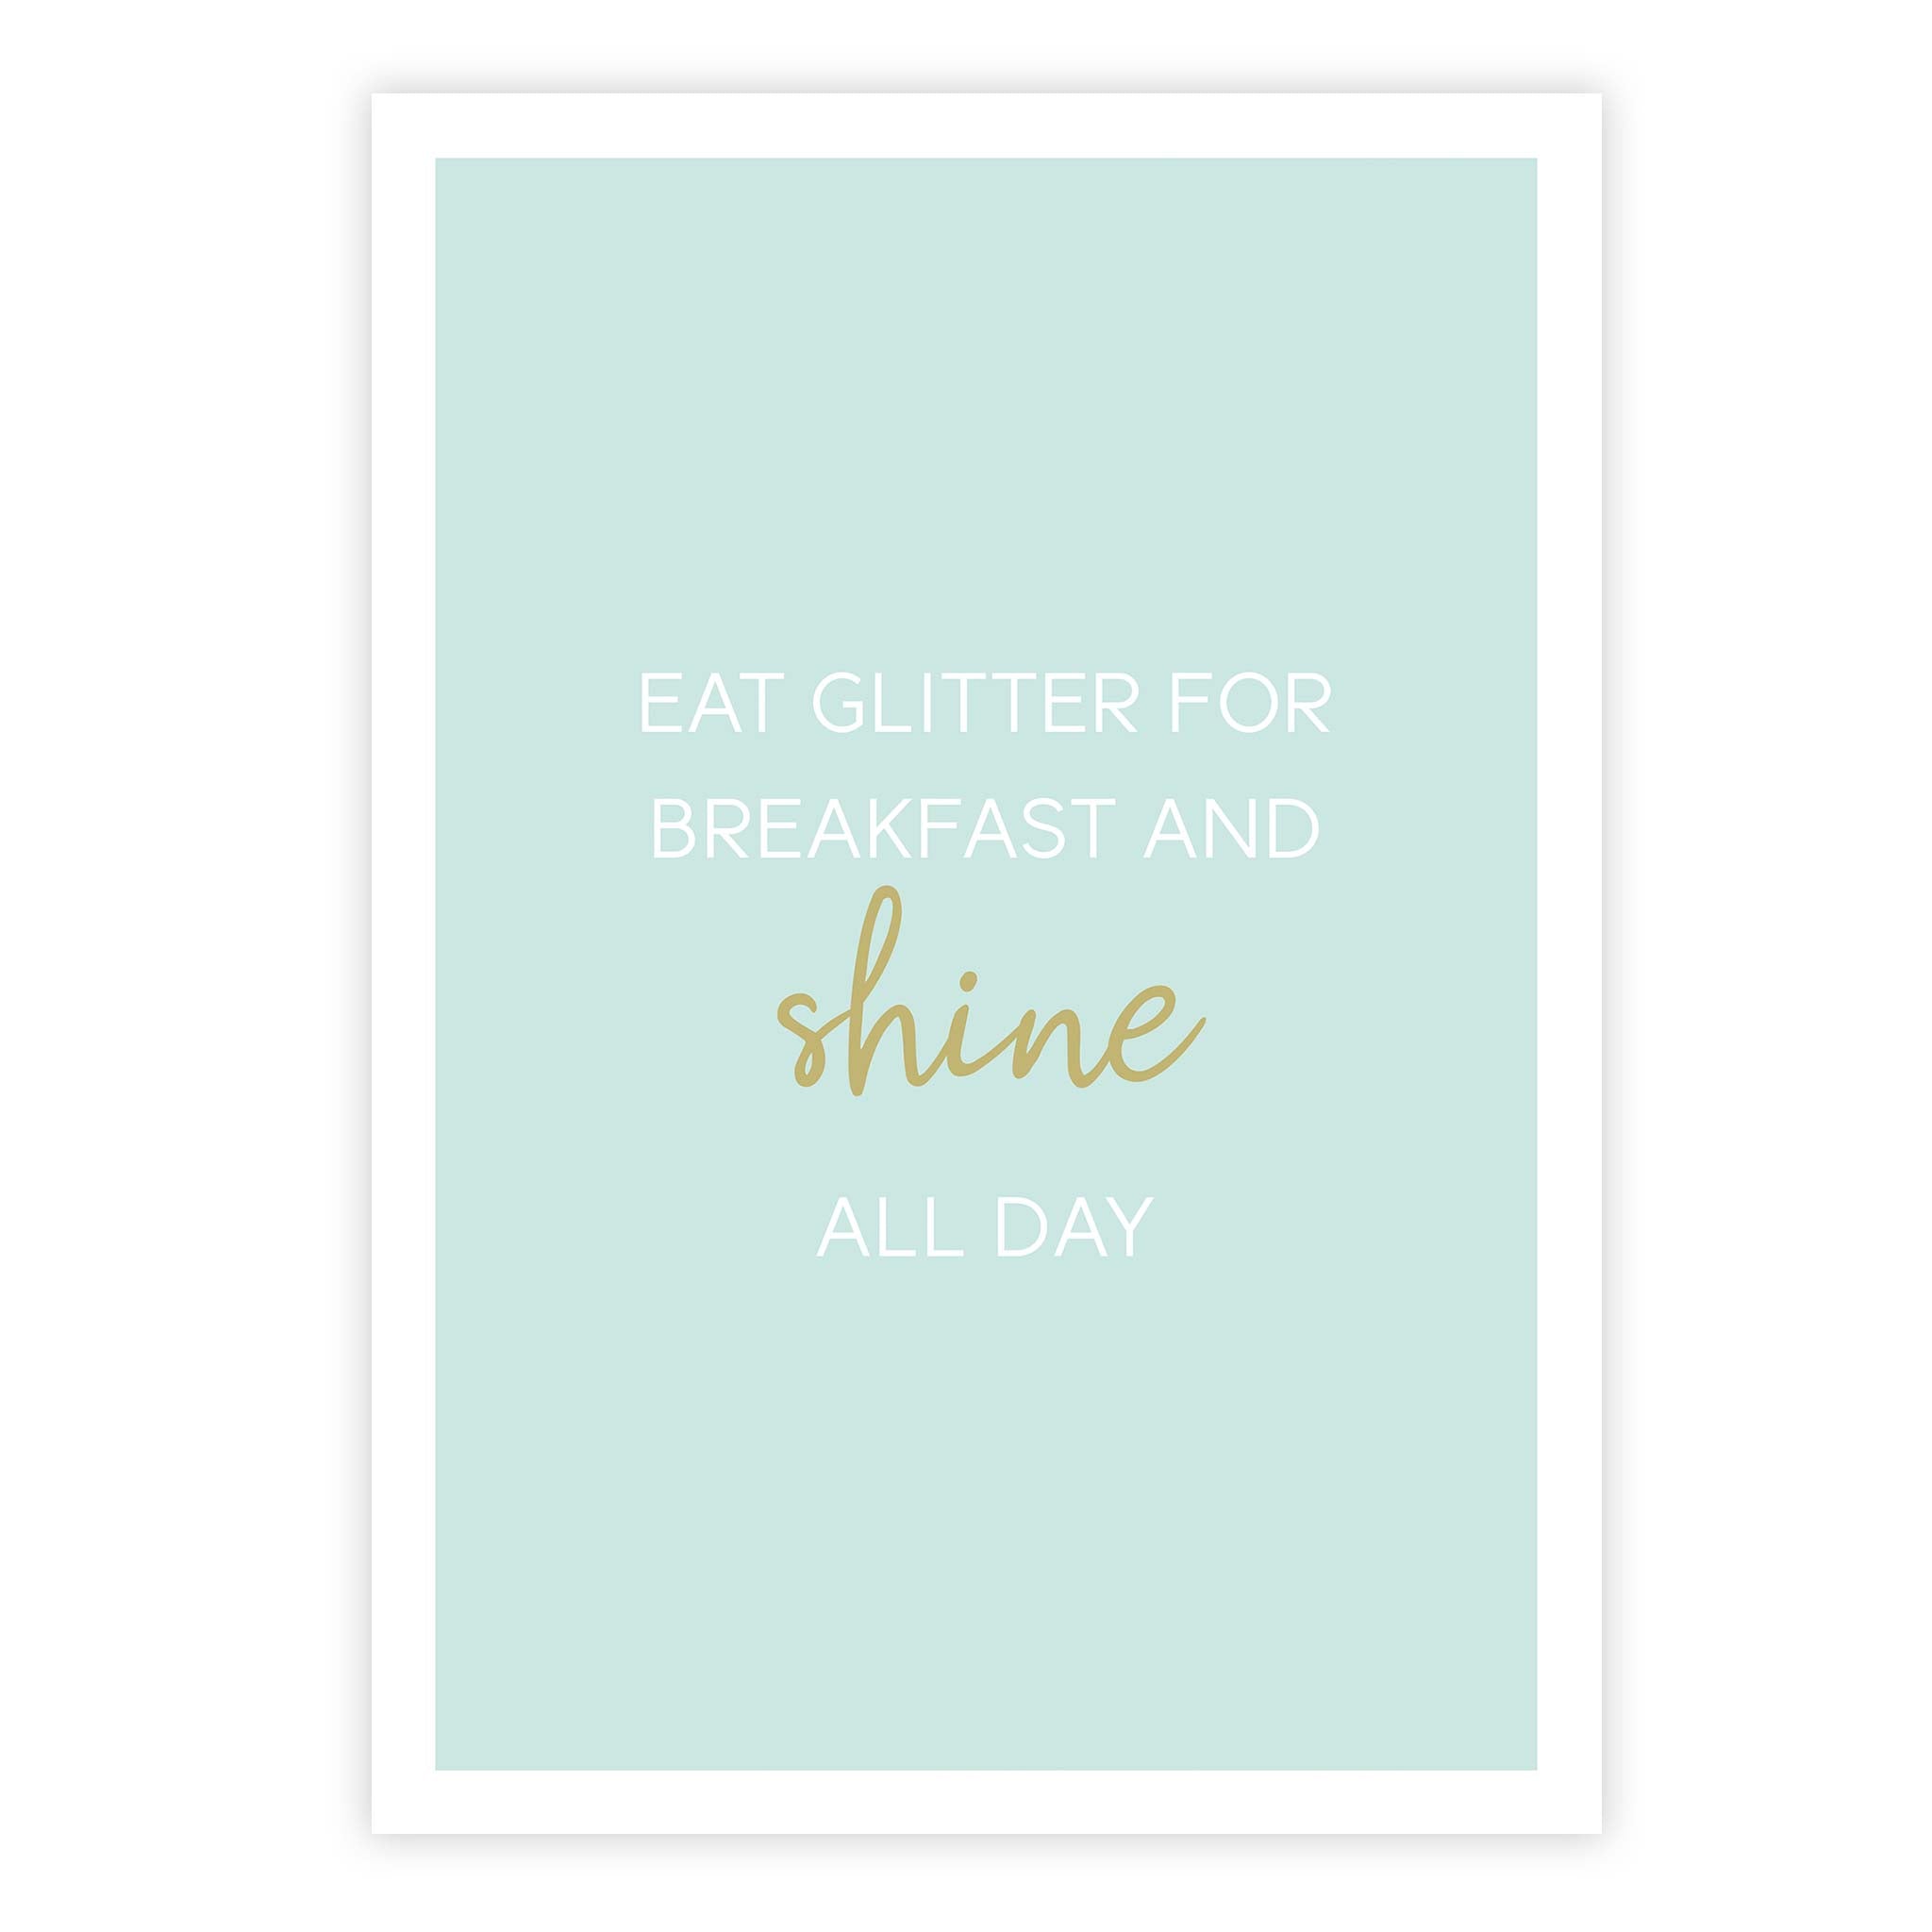 Eat glitter for breakfast and shine all day